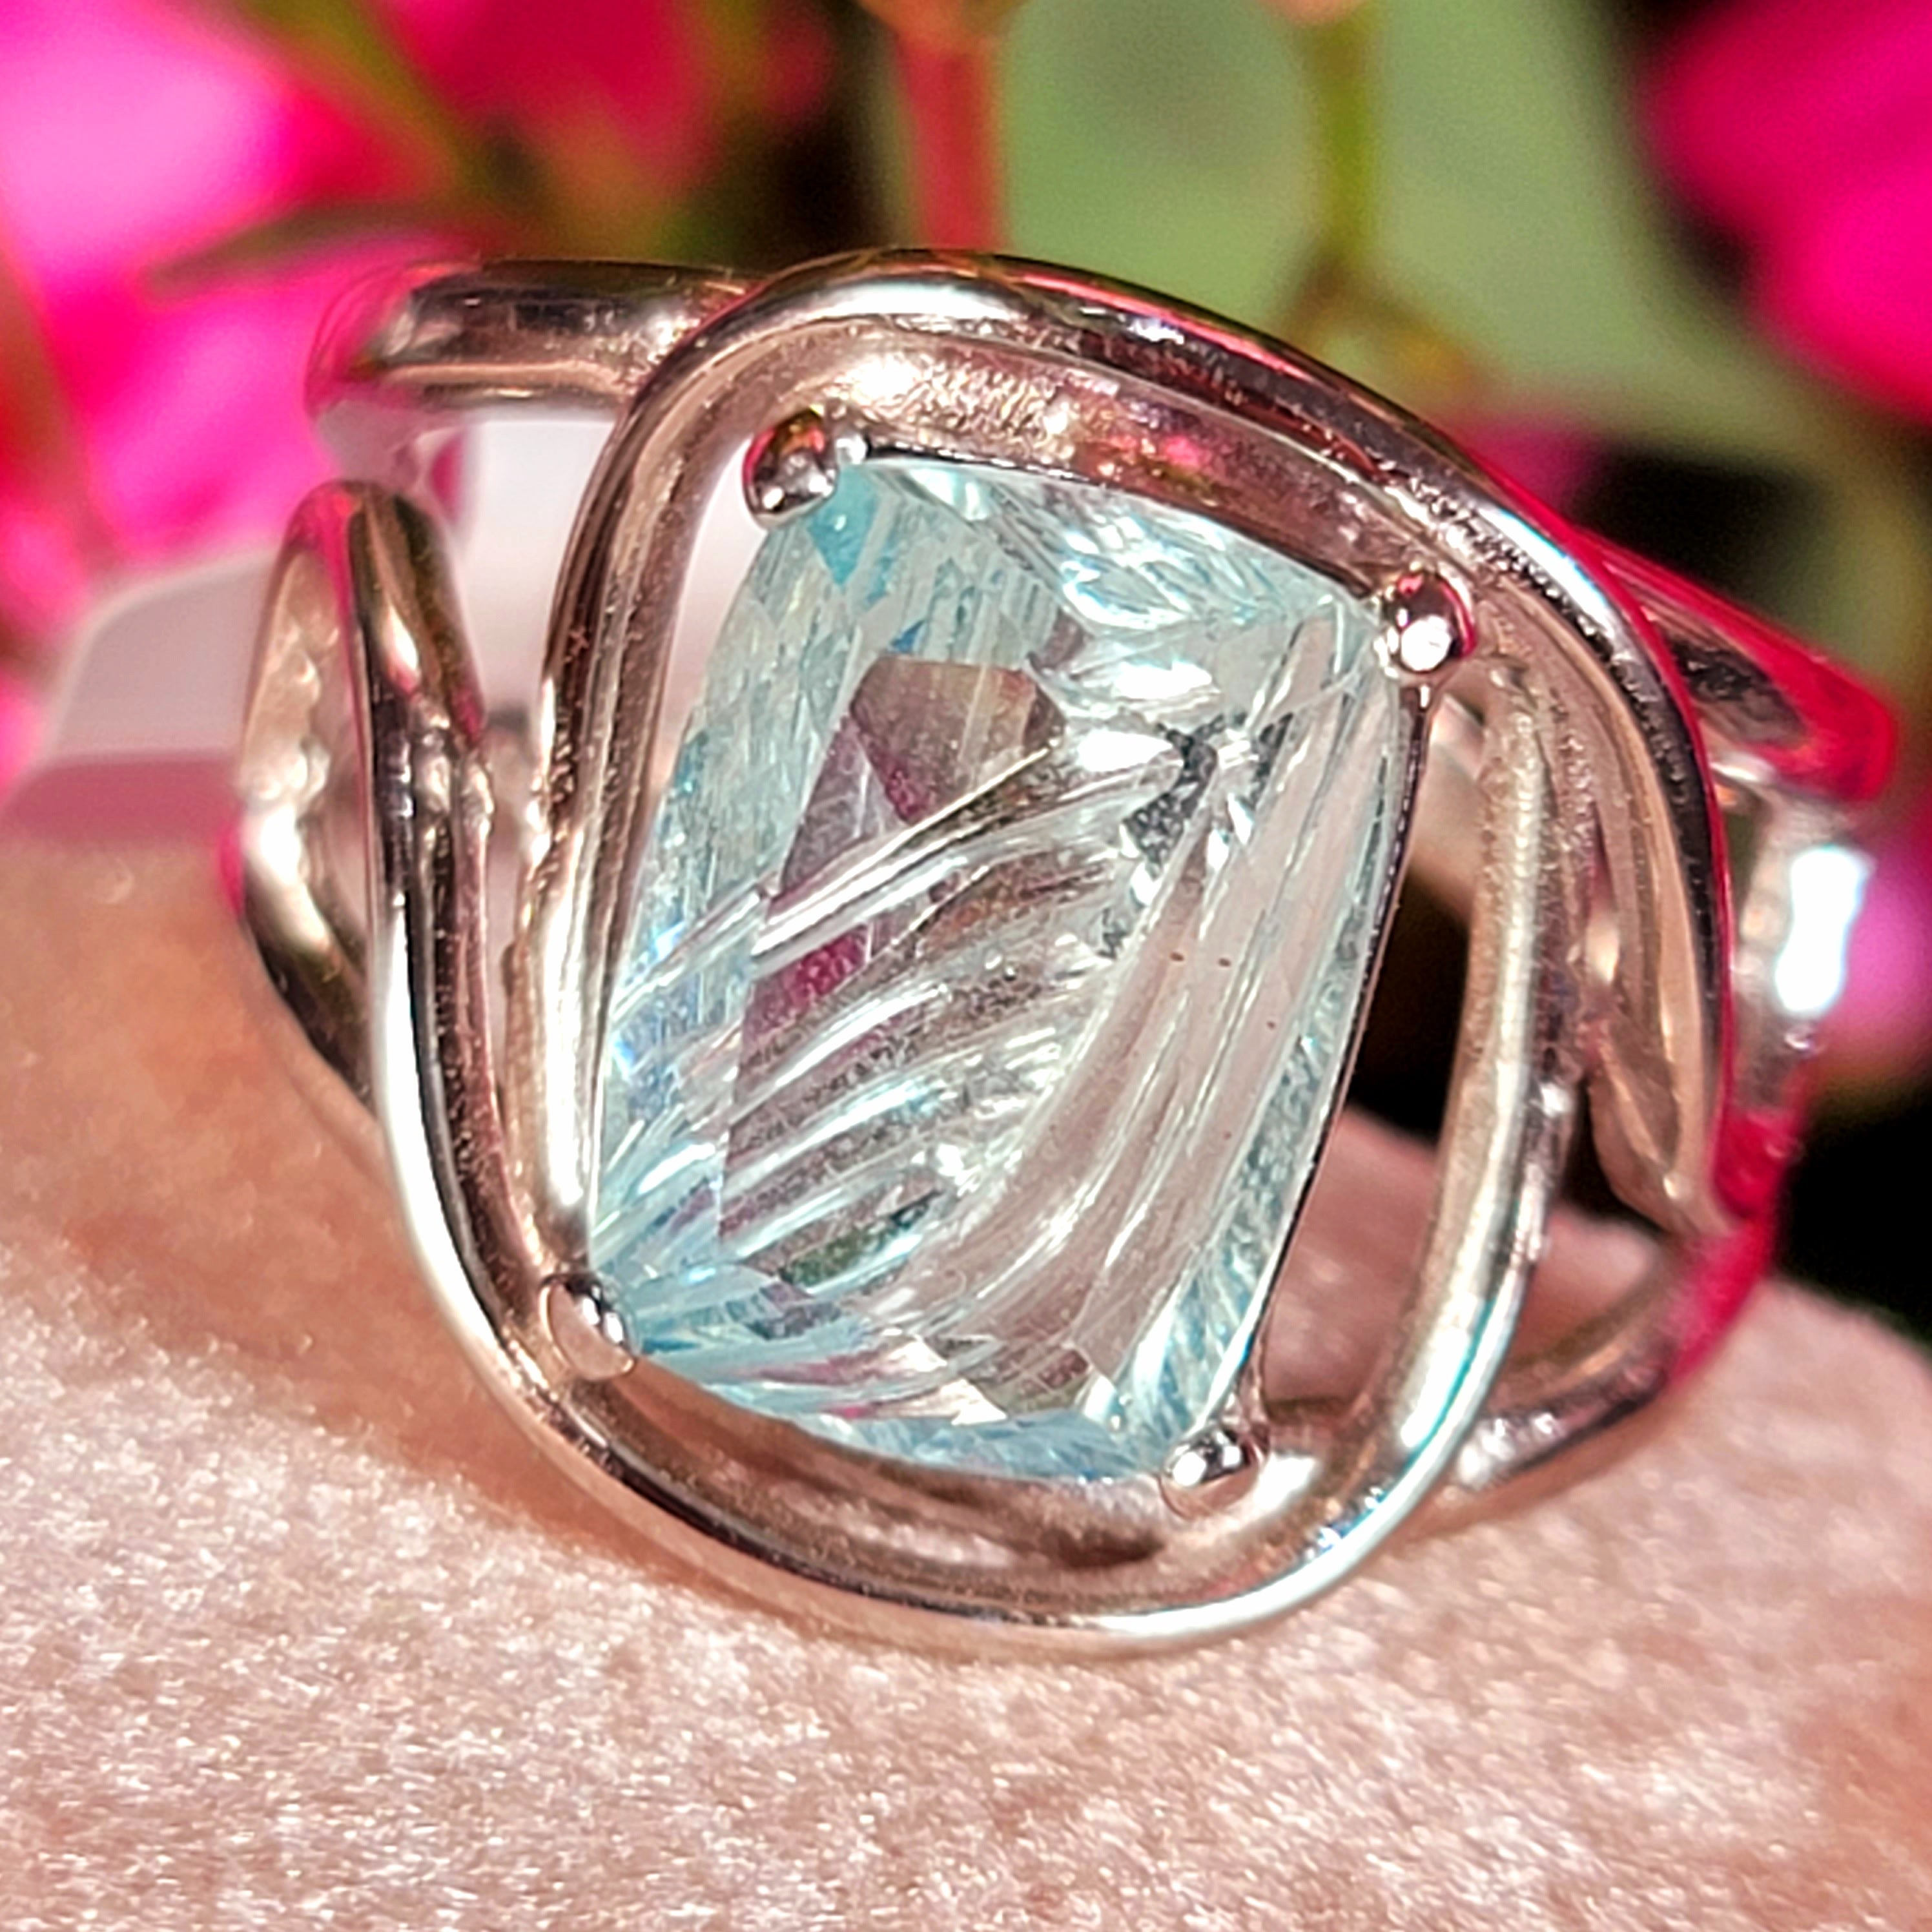 Aquamarine Carved Finger Cuff Adjustable Ring .925 Silver for Improved Communication and Peace